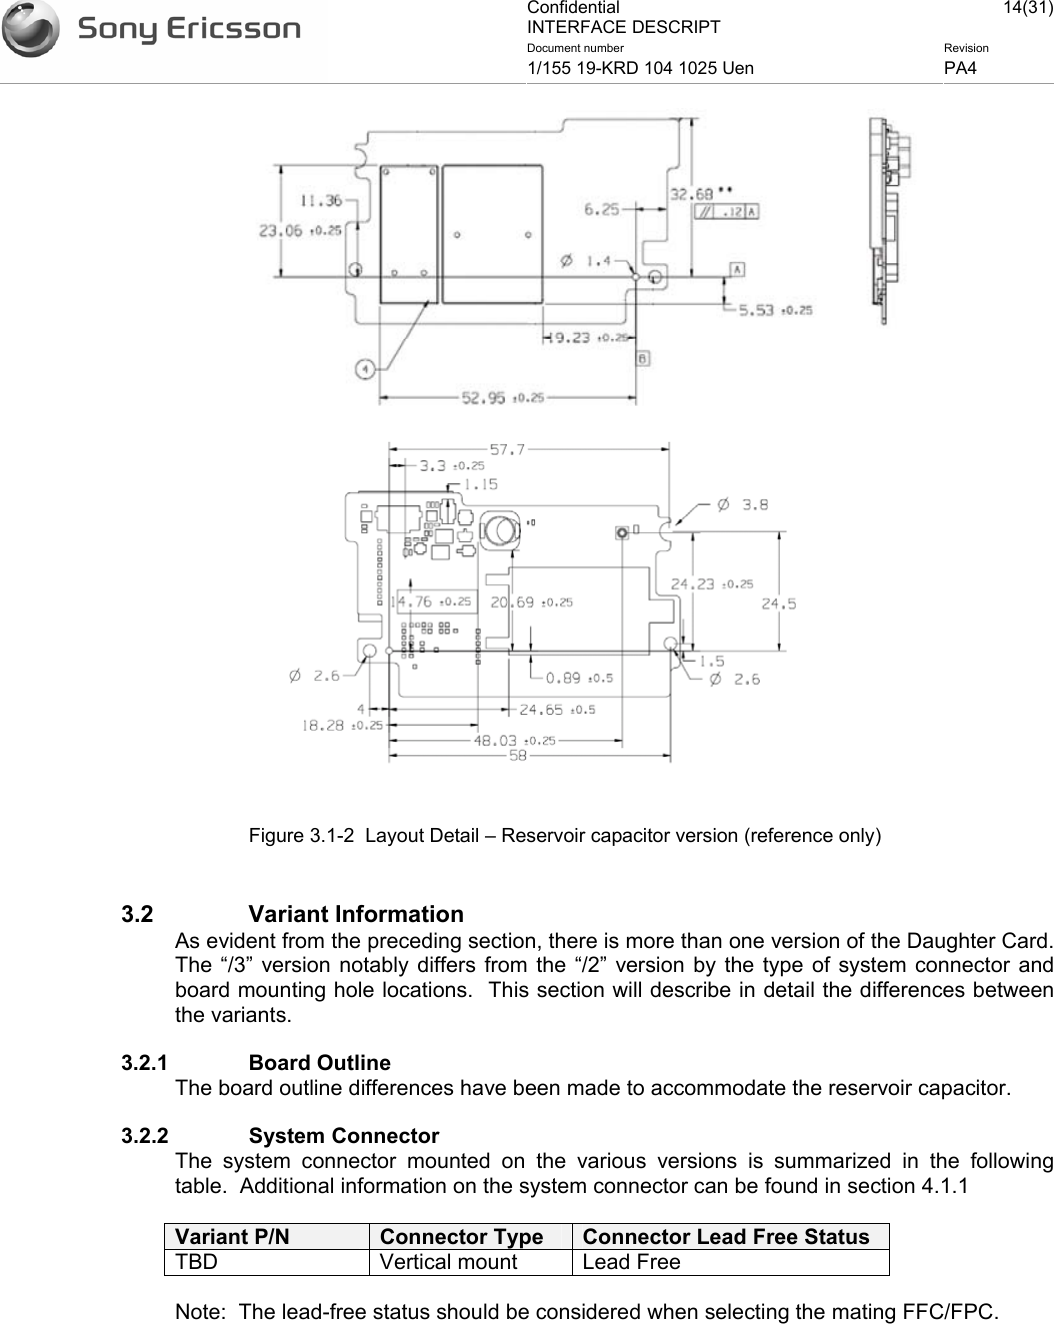 Confidential INTERFACE DESCRIPT 14(31)Document number  Revision 1/155 19-KRD 104 1025 Uen  PA4      Figure 3.1-2  Layout Detail – Reservoir capacitor version (reference only)  3.2 Variant Information As evident from the preceding section, there is more than one version of the Daughter Card.  The “/3” version notably differs from the “/2” version by the type of system connector and board mounting hole locations.  This section will describe in detail the differences between the variants. 3.2.1 Board Outline The board outline differences have been made to accommodate the reservoir capacitor.   3.2.2 System Connector The system connector mounted on the various versions is summarized in the following table.  Additional information on the system connector can be found in section 4.1.1  Variant P/N  Connector Type  Connector Lead Free Status TBD Vertical mount Lead Free Note:  The lead-free status should be considered when selecting the mating FFC/FPC.   